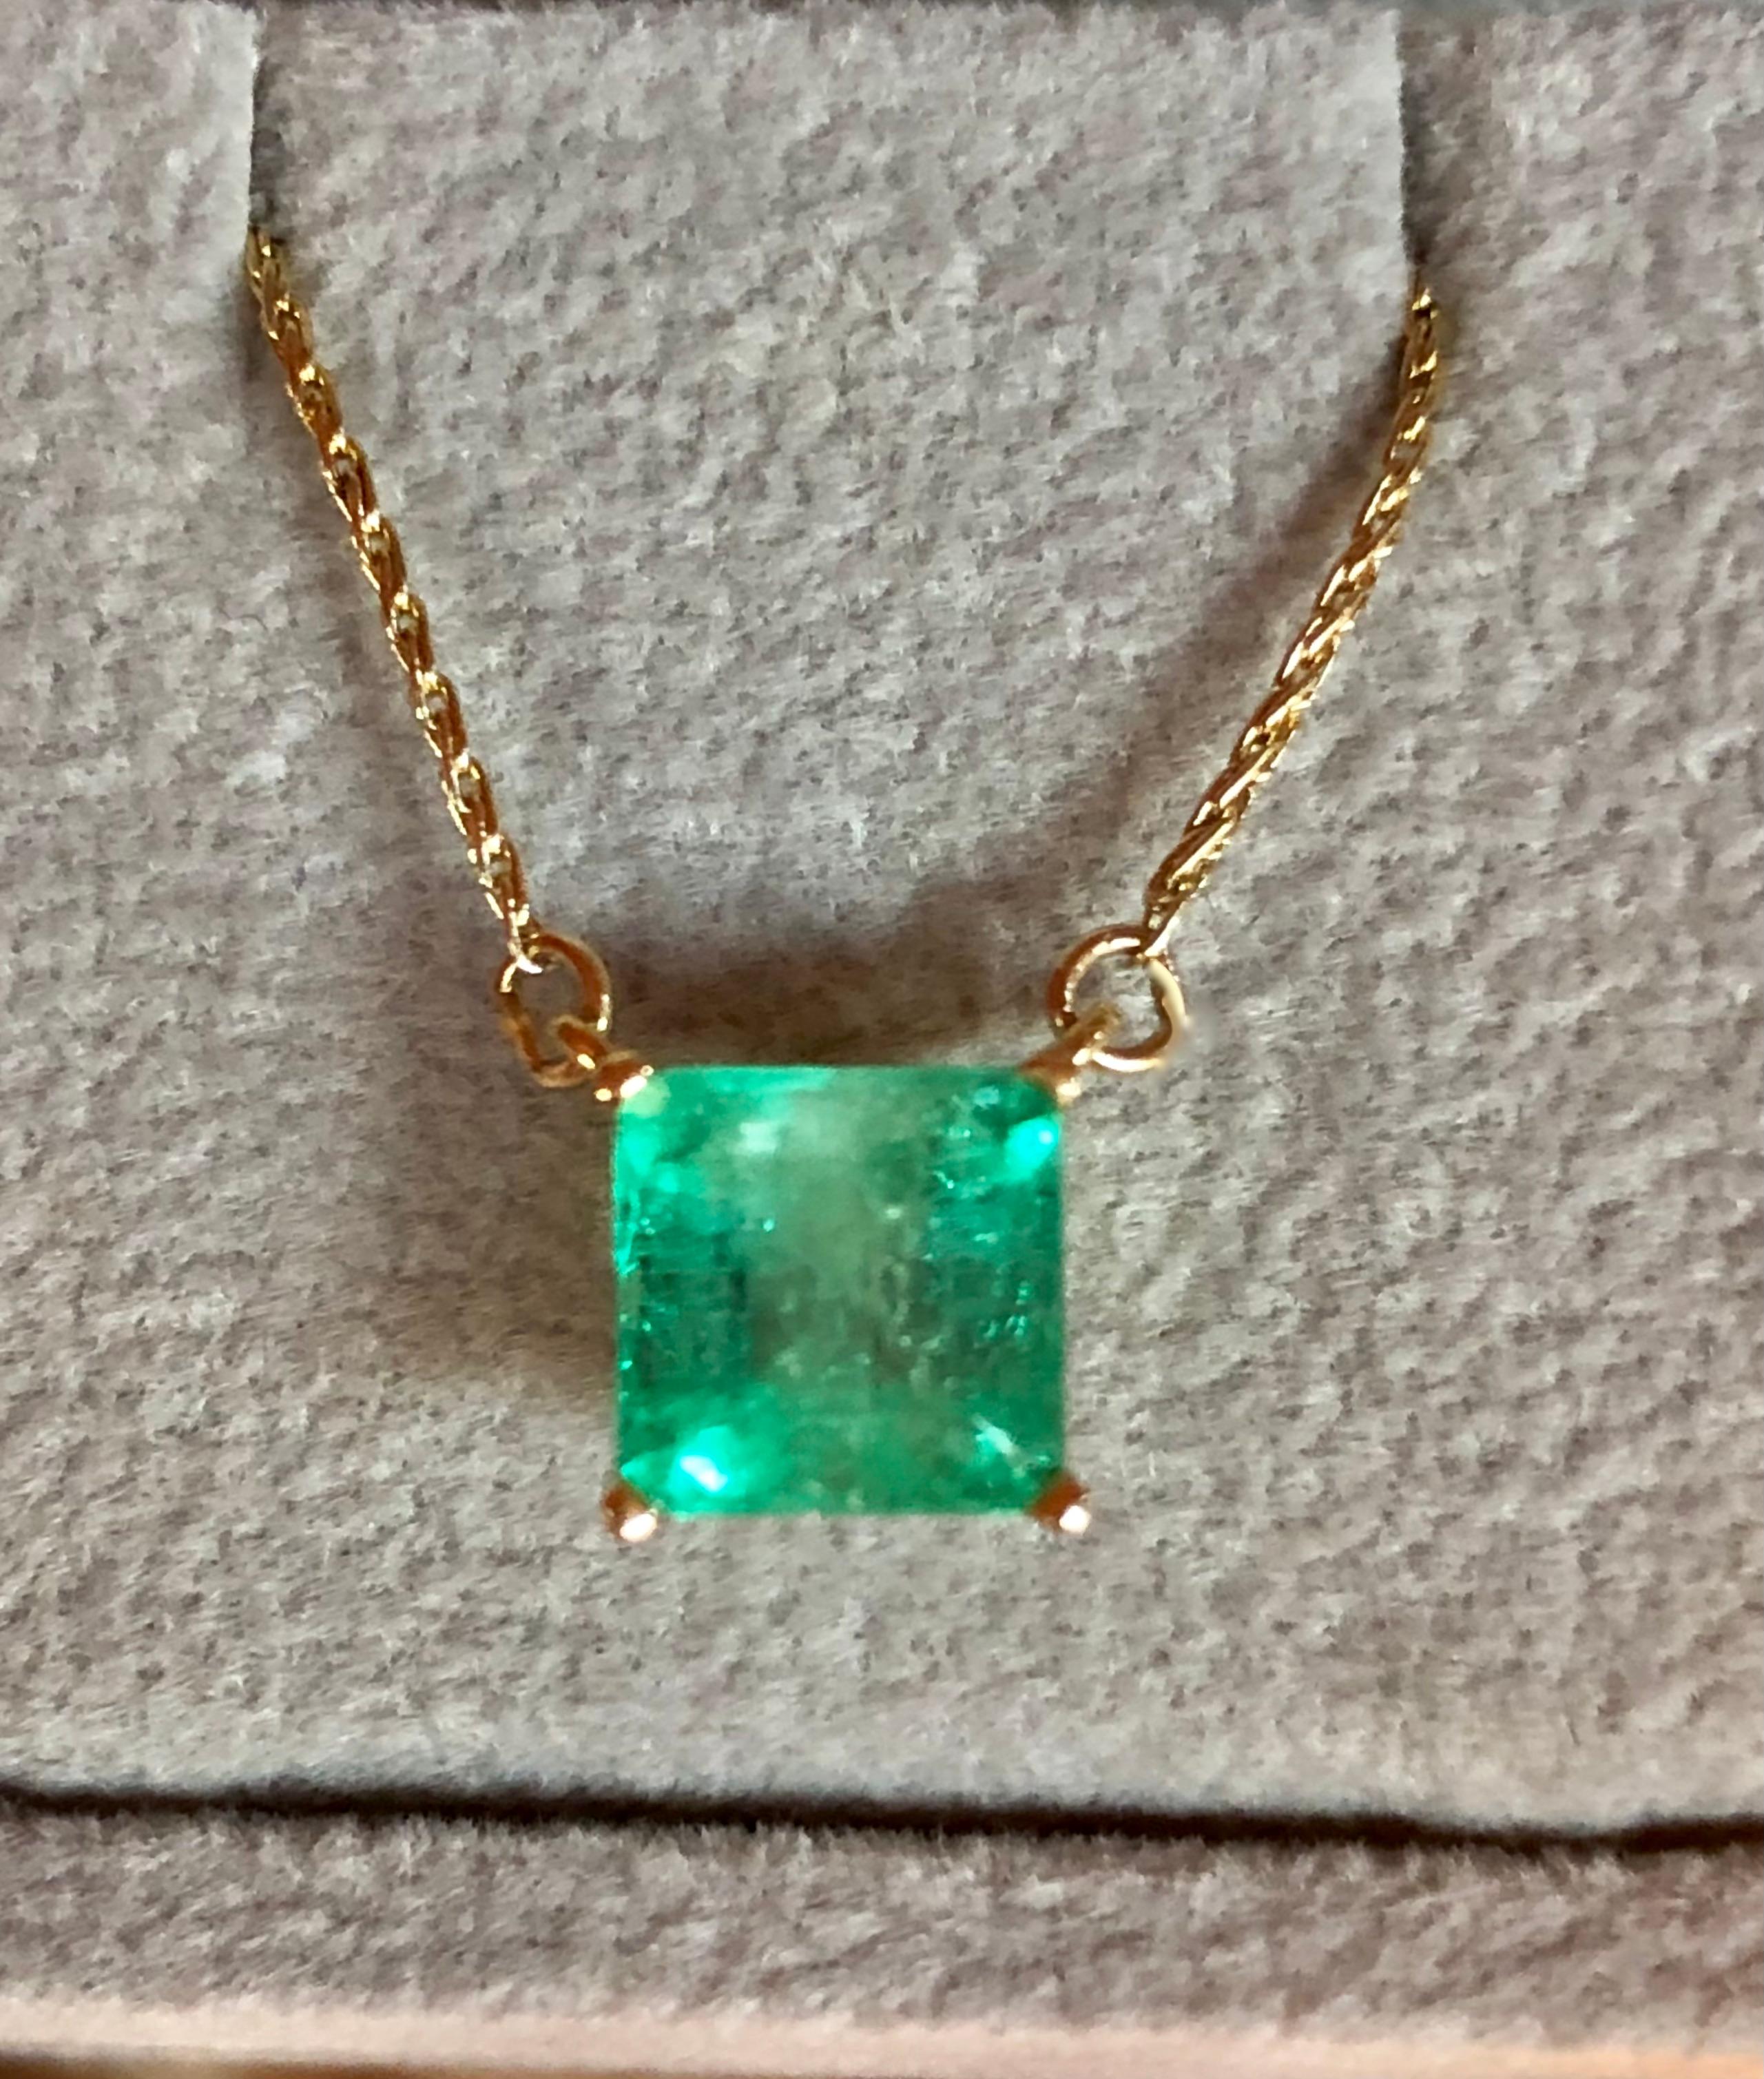 Square Cut Colombian Emerald Solitaire Pendant Drop Necklace in 14K Yellow Gold.
This necklace features a medium green natural Colombian emerald, clarity: SI, Weight 1.68 Carat, Square Shaped 7.0mm x 7.0mm prong-style setting. 
Wheat Chain 14K